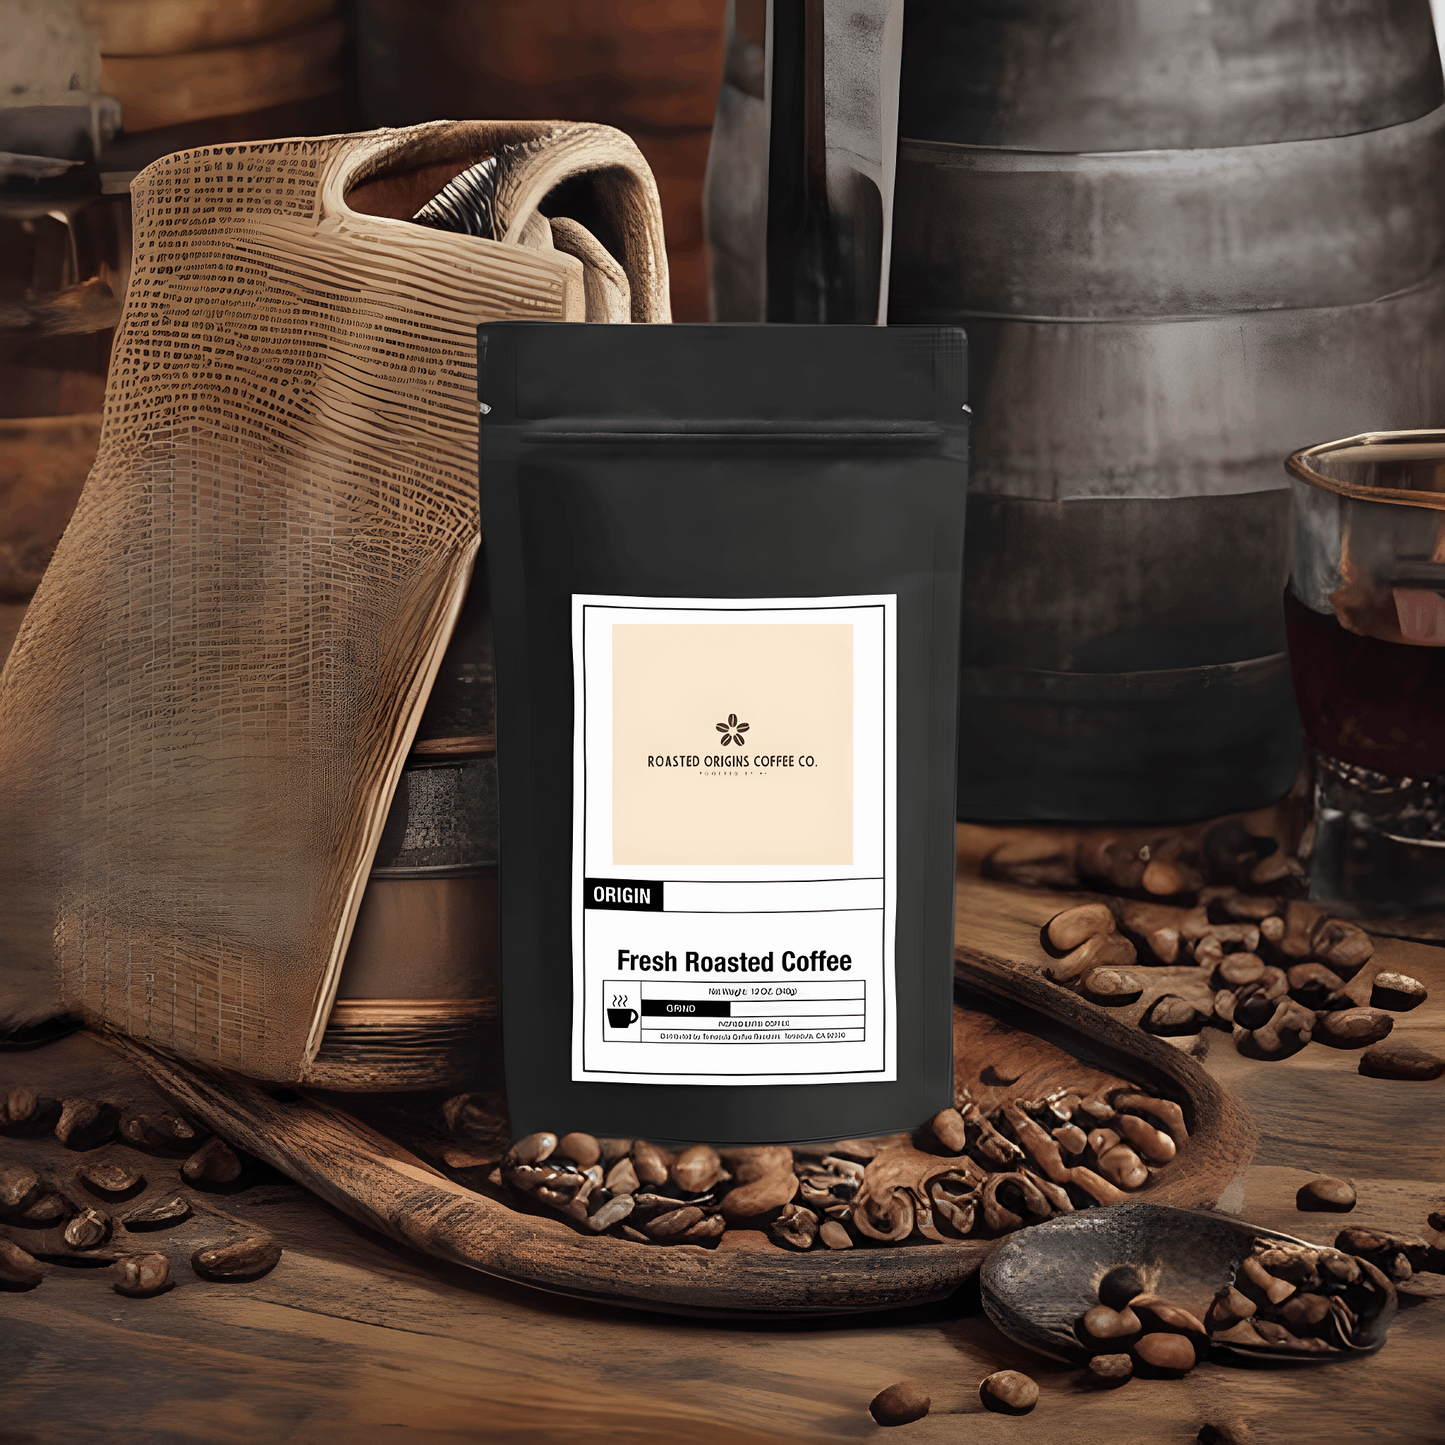 Whiskey Barrel Aged Blend Coffee next to barrel and coffee beans